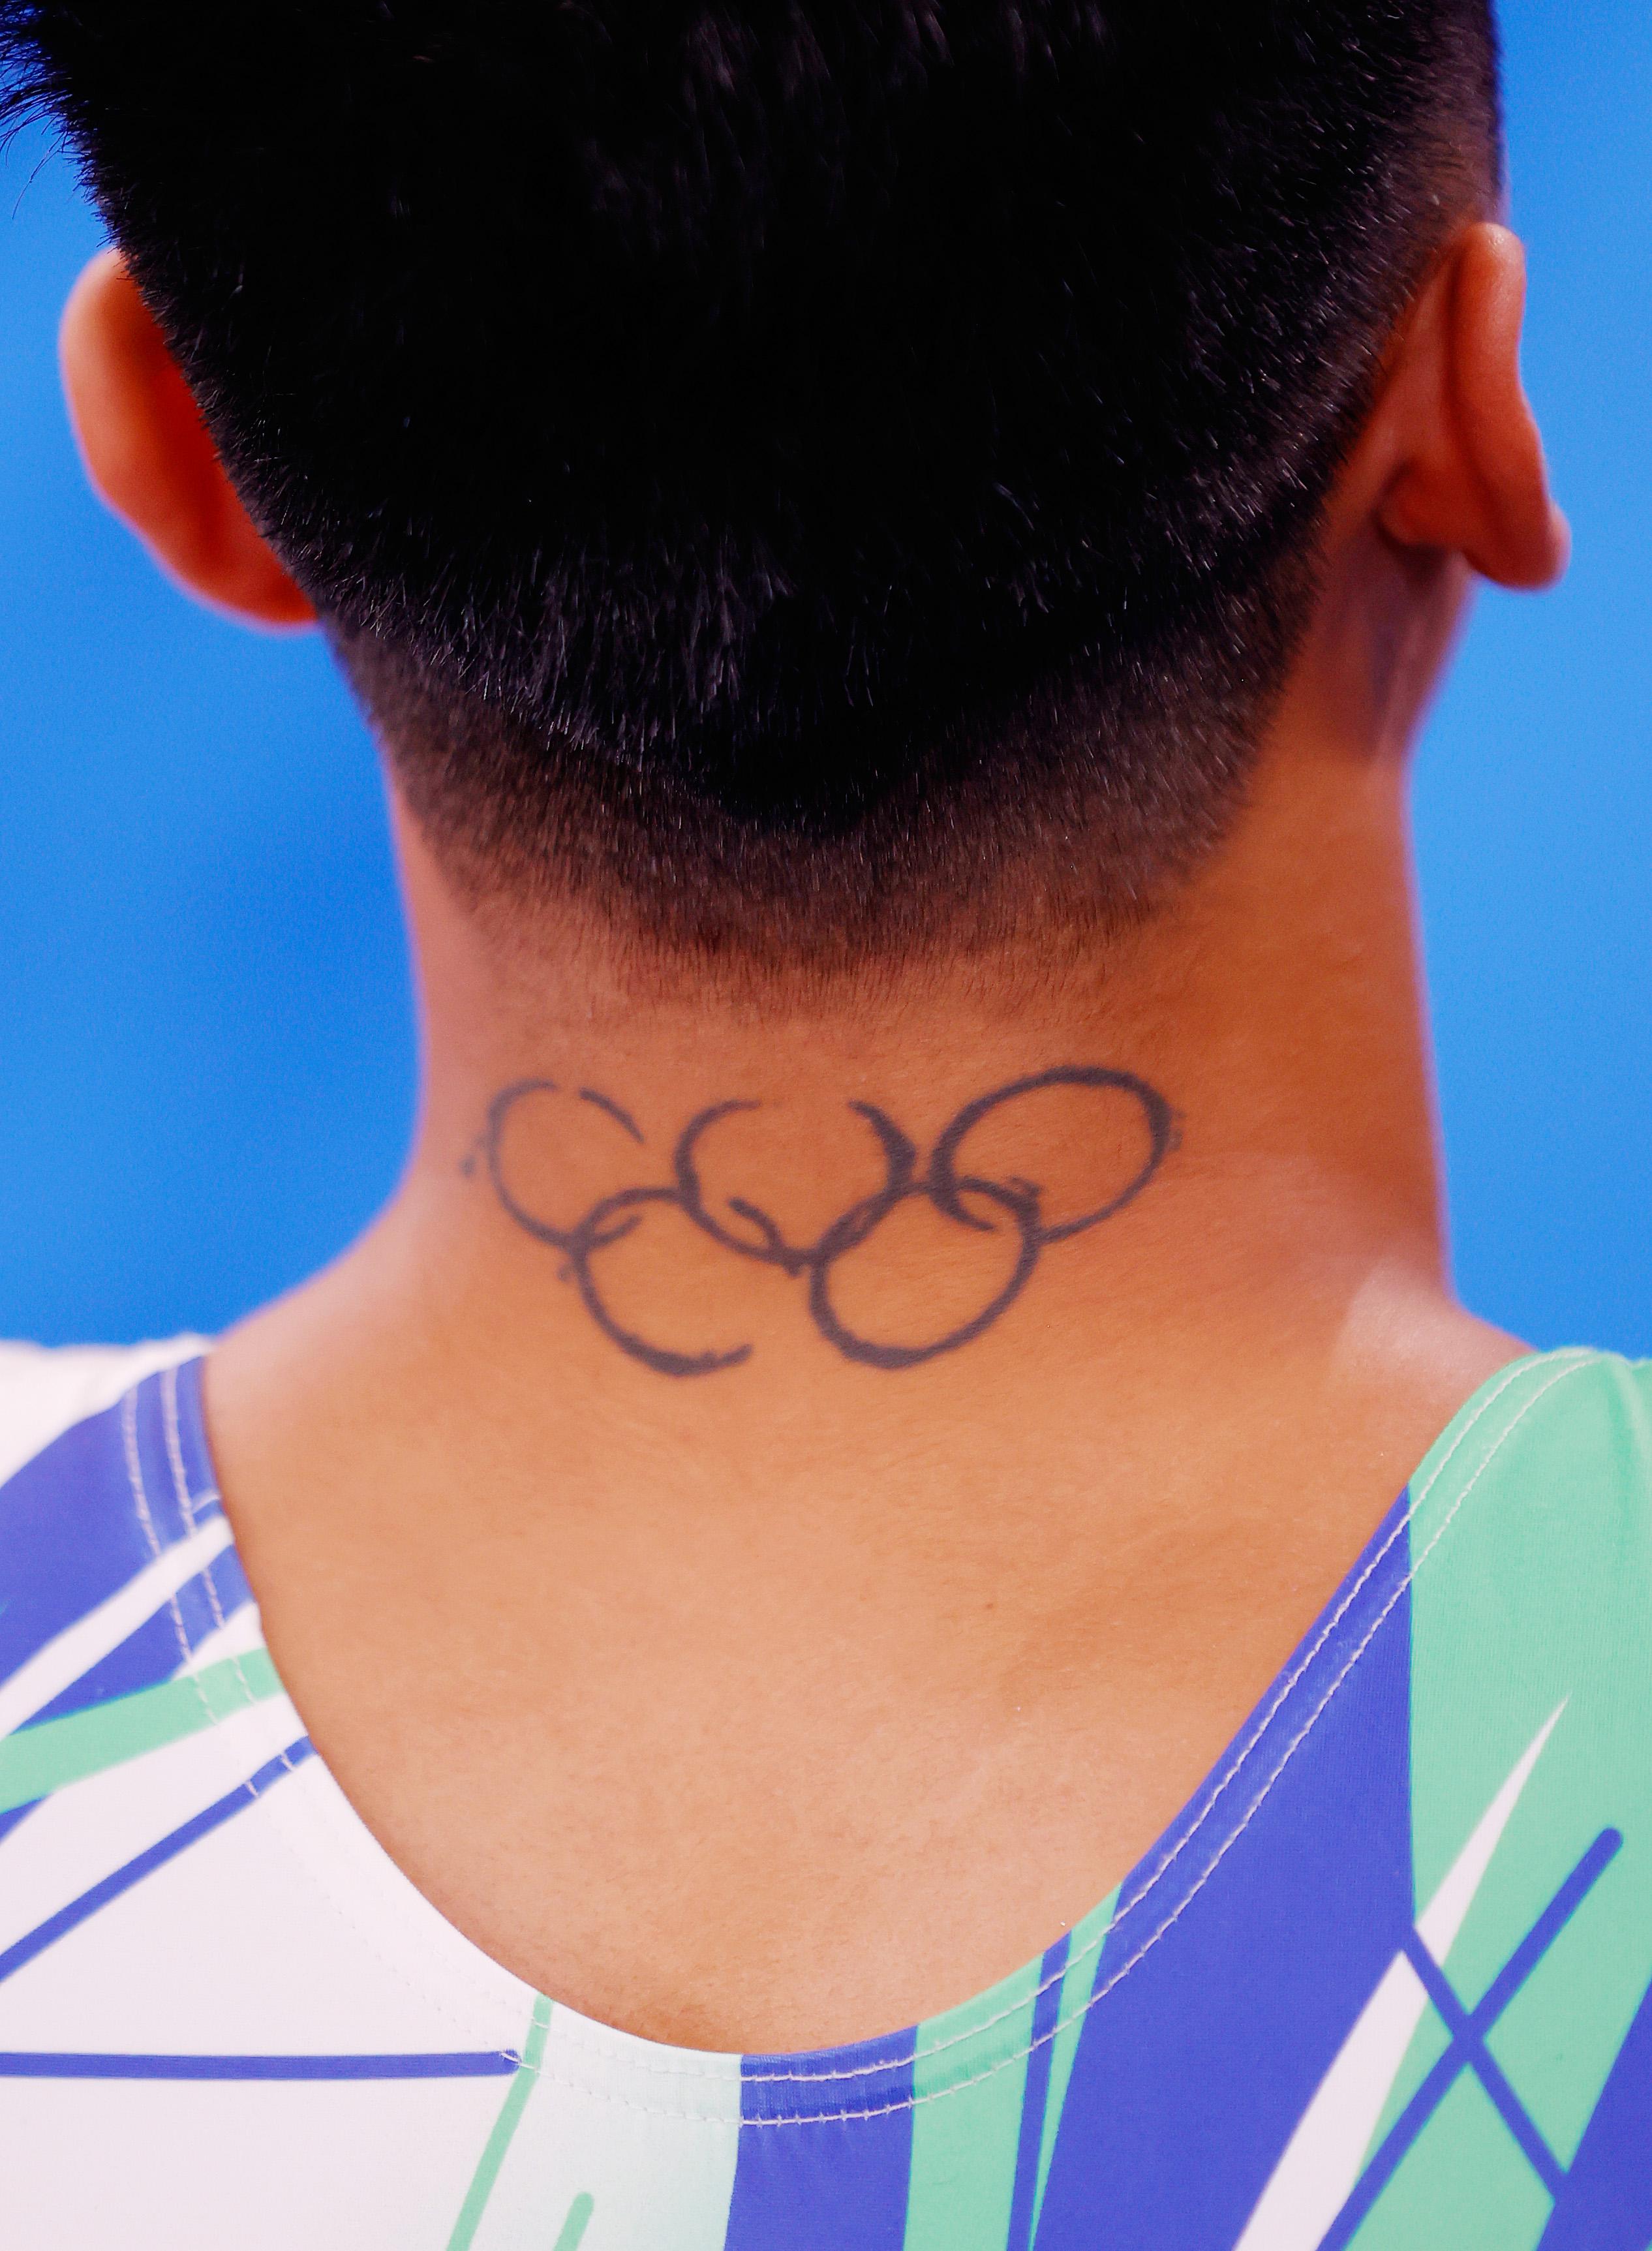 When Did You Start Being Allowed To Show Your Tattoos At The Olympics?